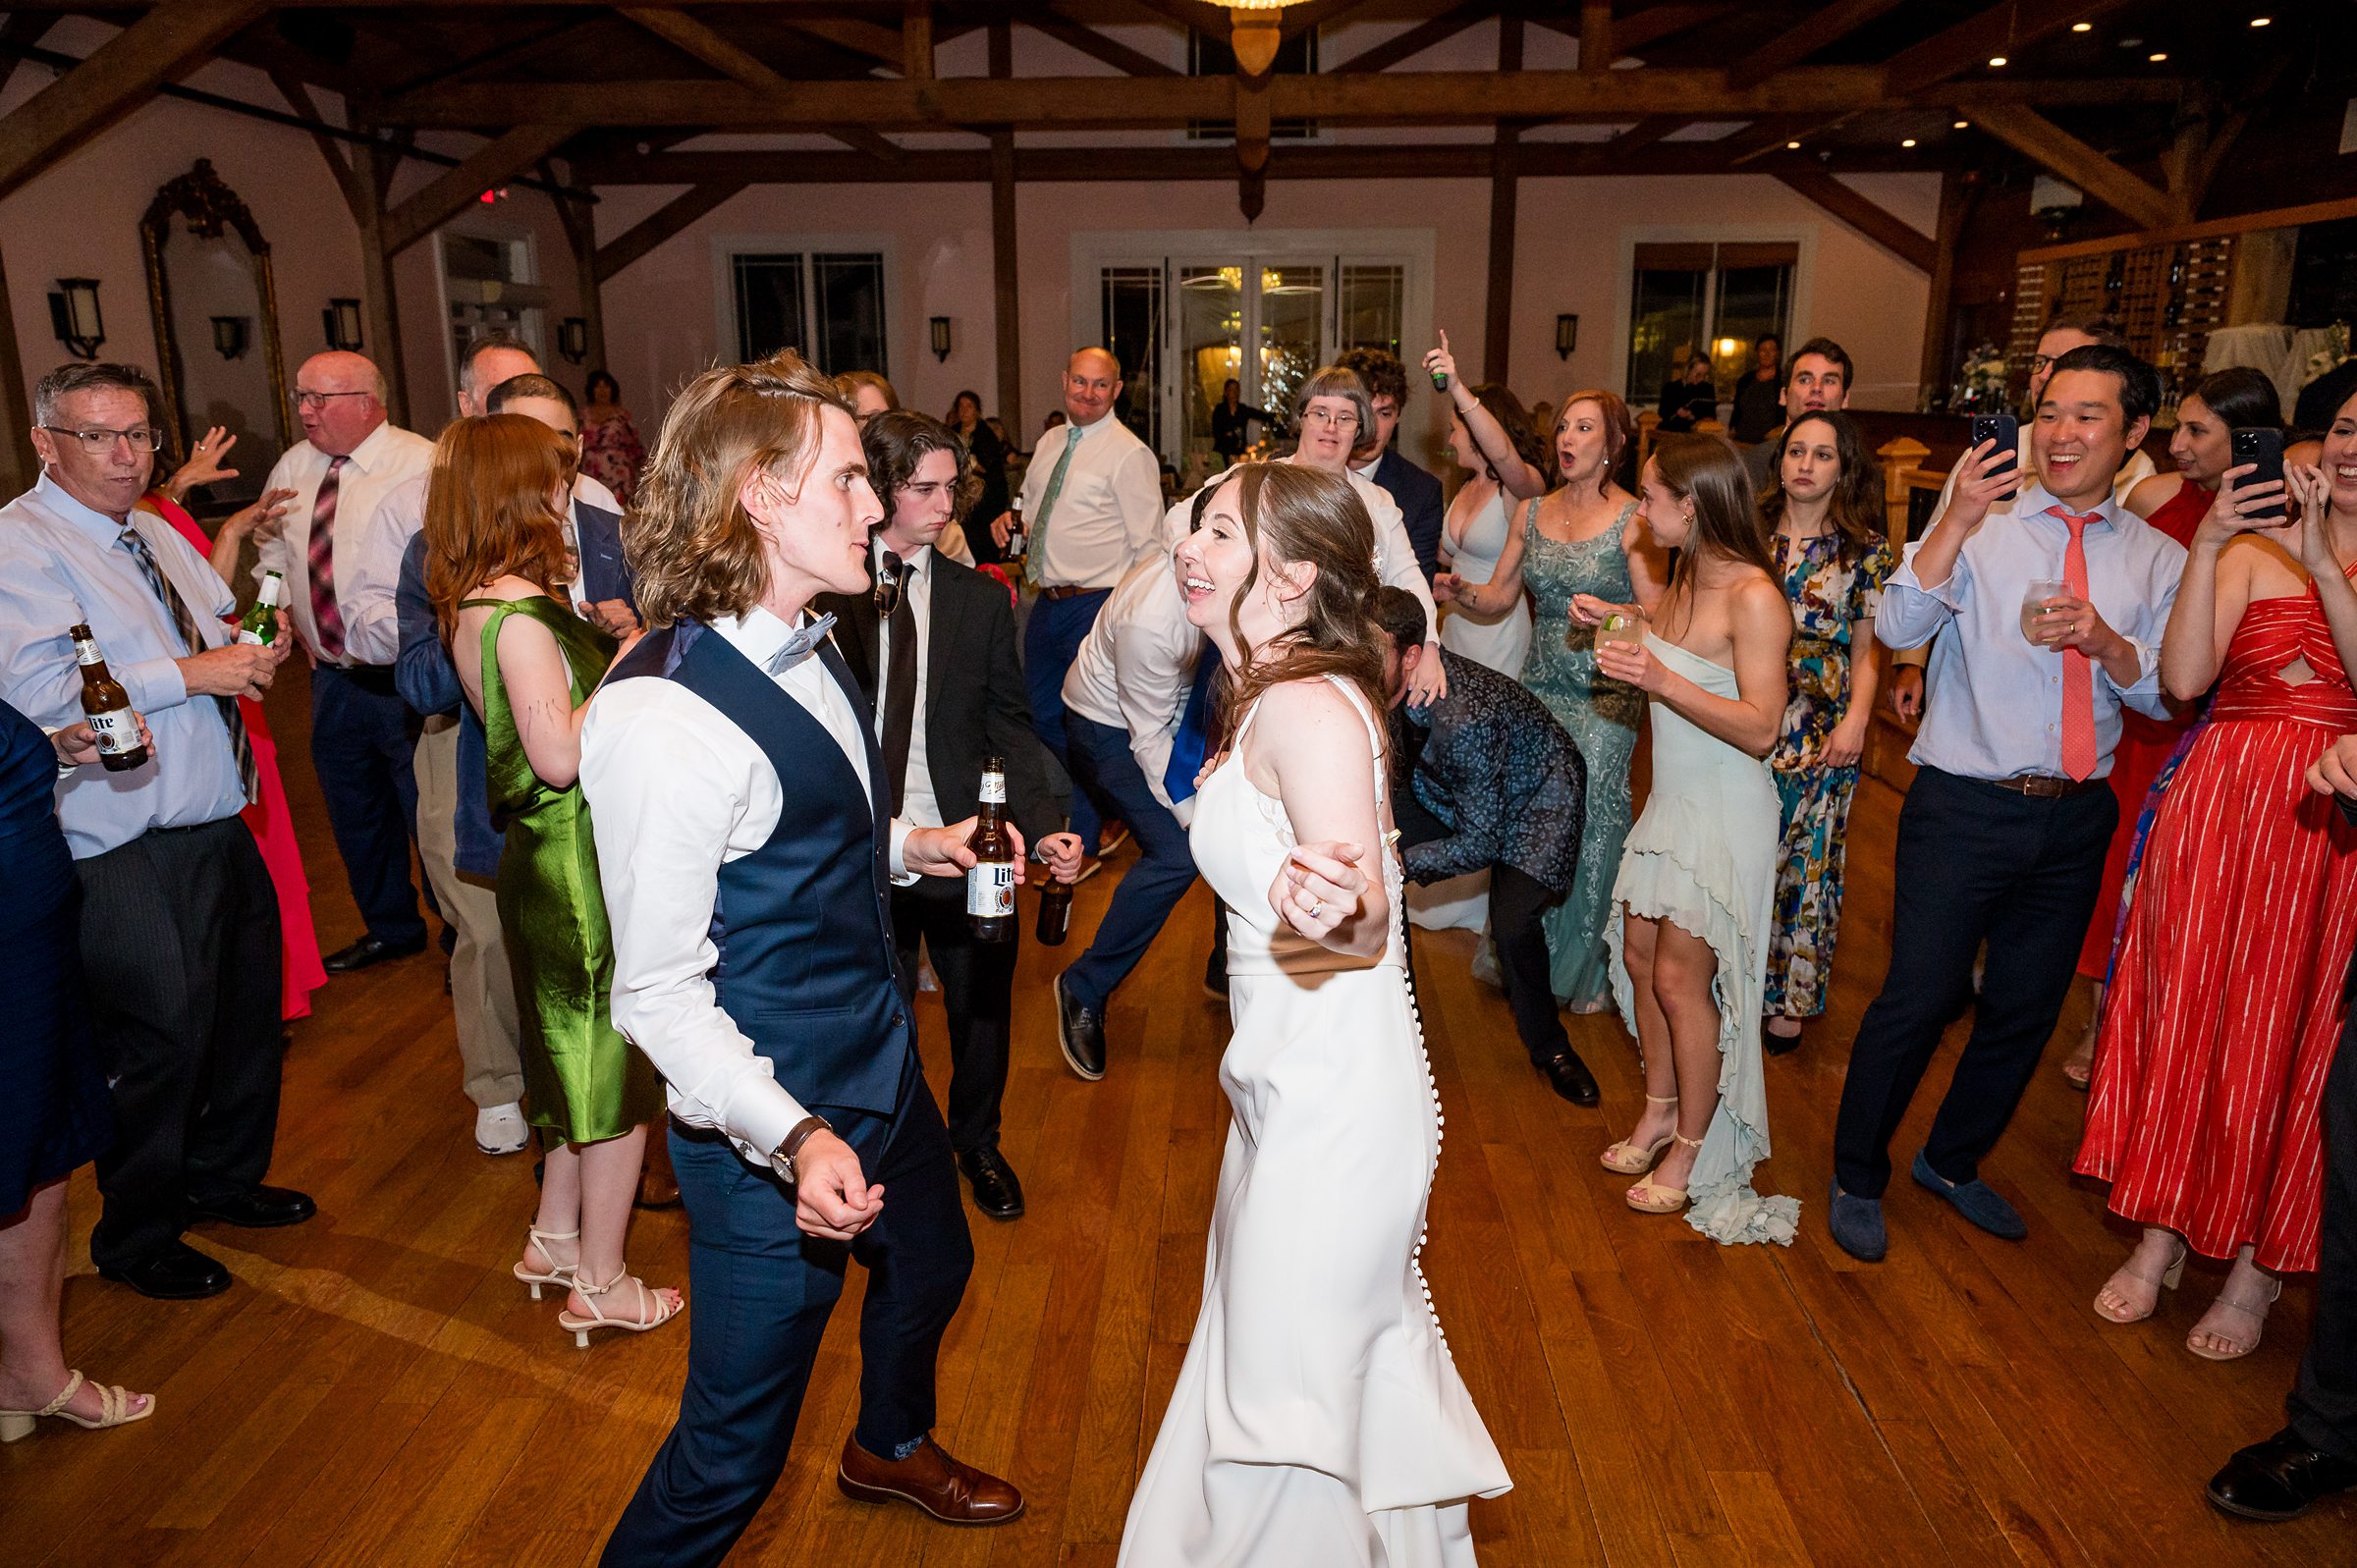 A bride and groom dance together in the center of a lively wedding reception, surrounded by cheering guests on a wooden floor.